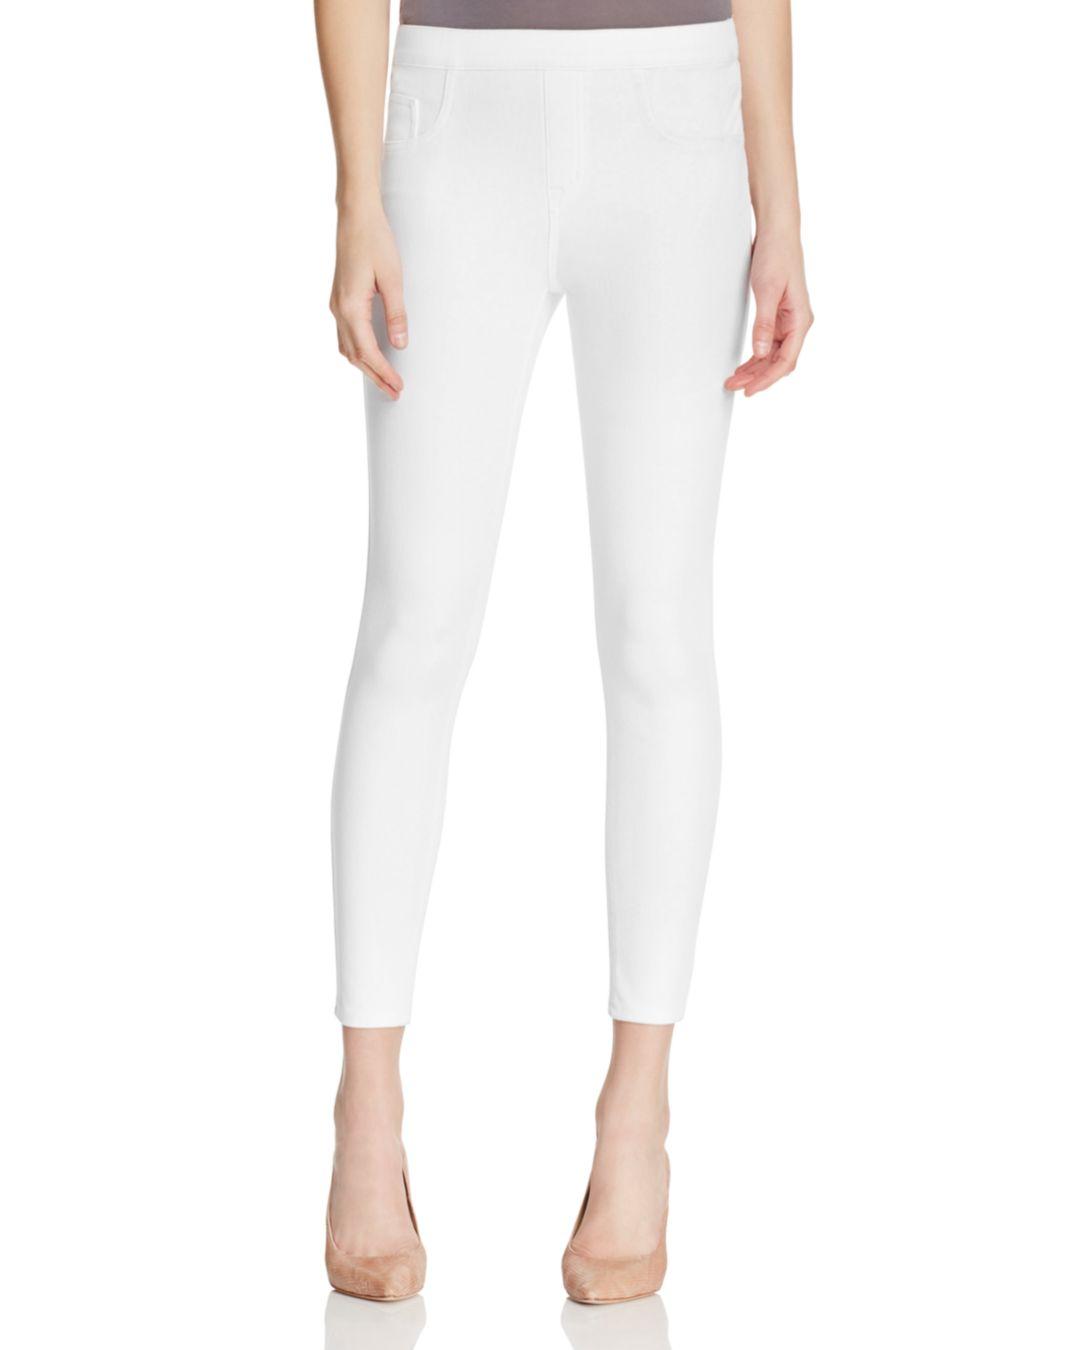 Spanx Cotton Ankle Jean - Ish Leggings in White - Lyst